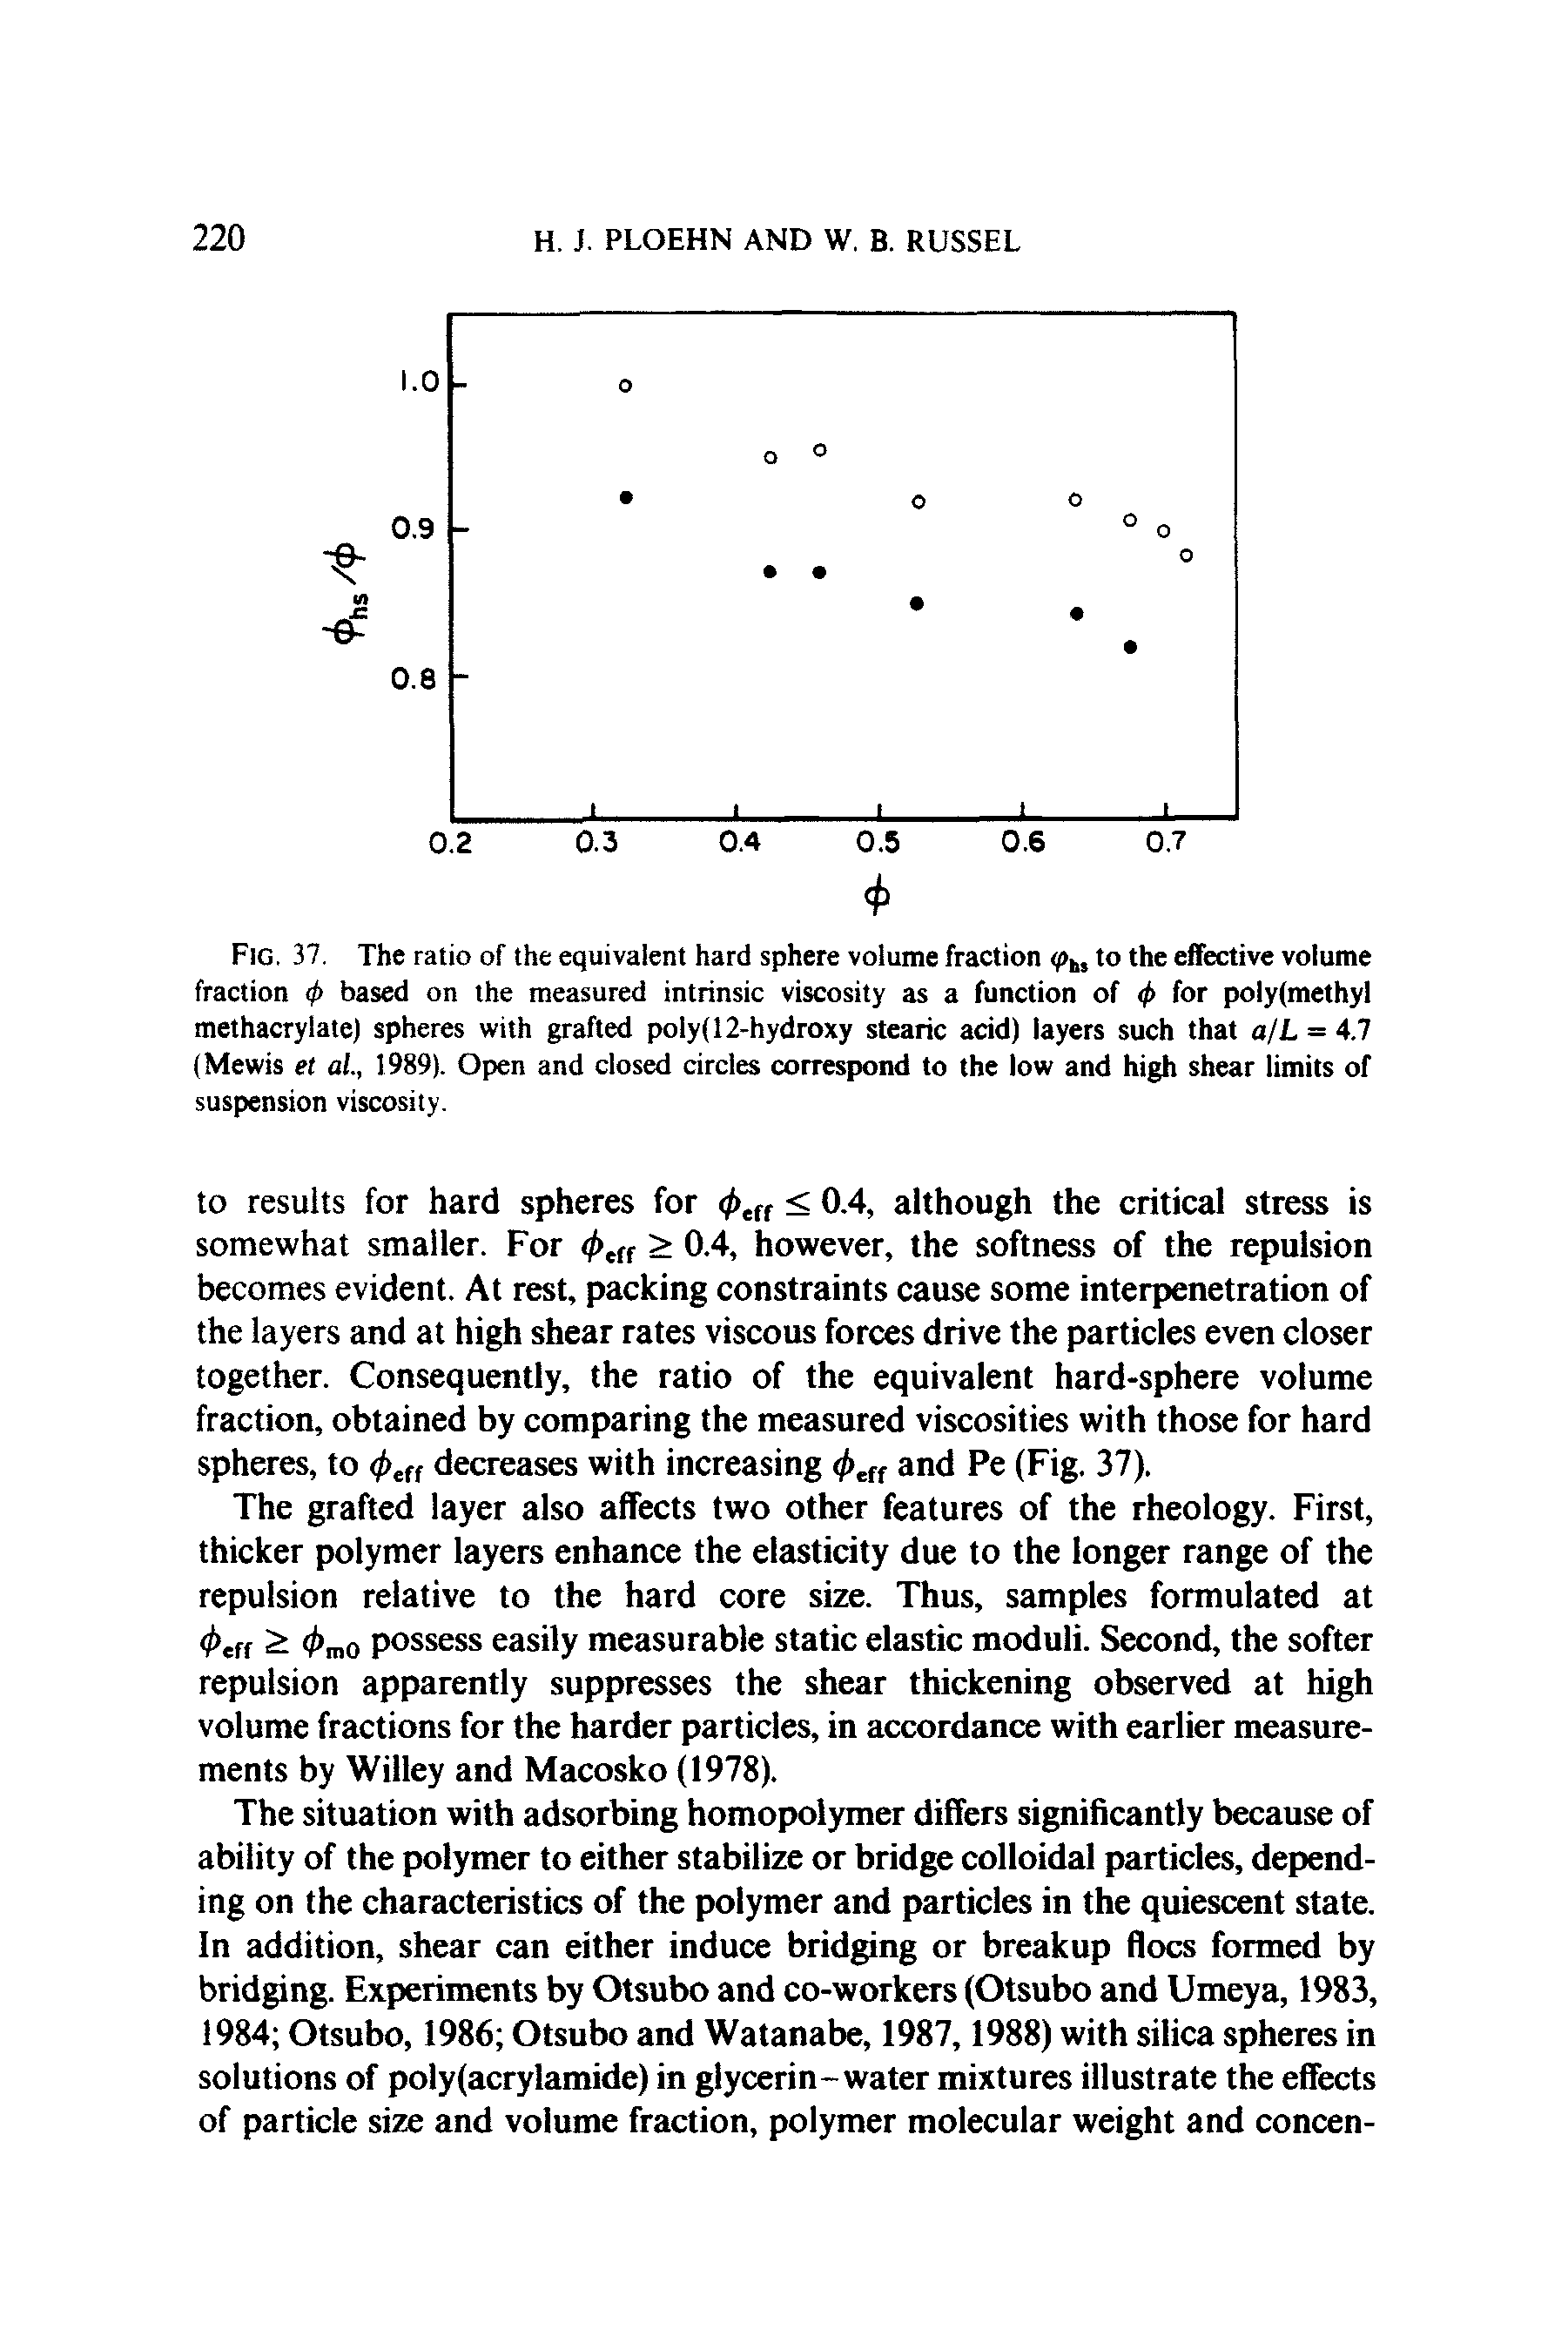 Fig. 37. The ratio of the equivalent hard sphere volume fraction <pbJ to the effective volume fraction <f> based on the measured intrinsic viscosity as a function of <j> for polyfmethyl methacrylate) spheres with grafted poly( 12-hydroxy stearic add) layers such that a/L = 4.7 (Mewis et ai, 1989). Open and closed circles correspond to the low and high shear limits of suspension viscosity.